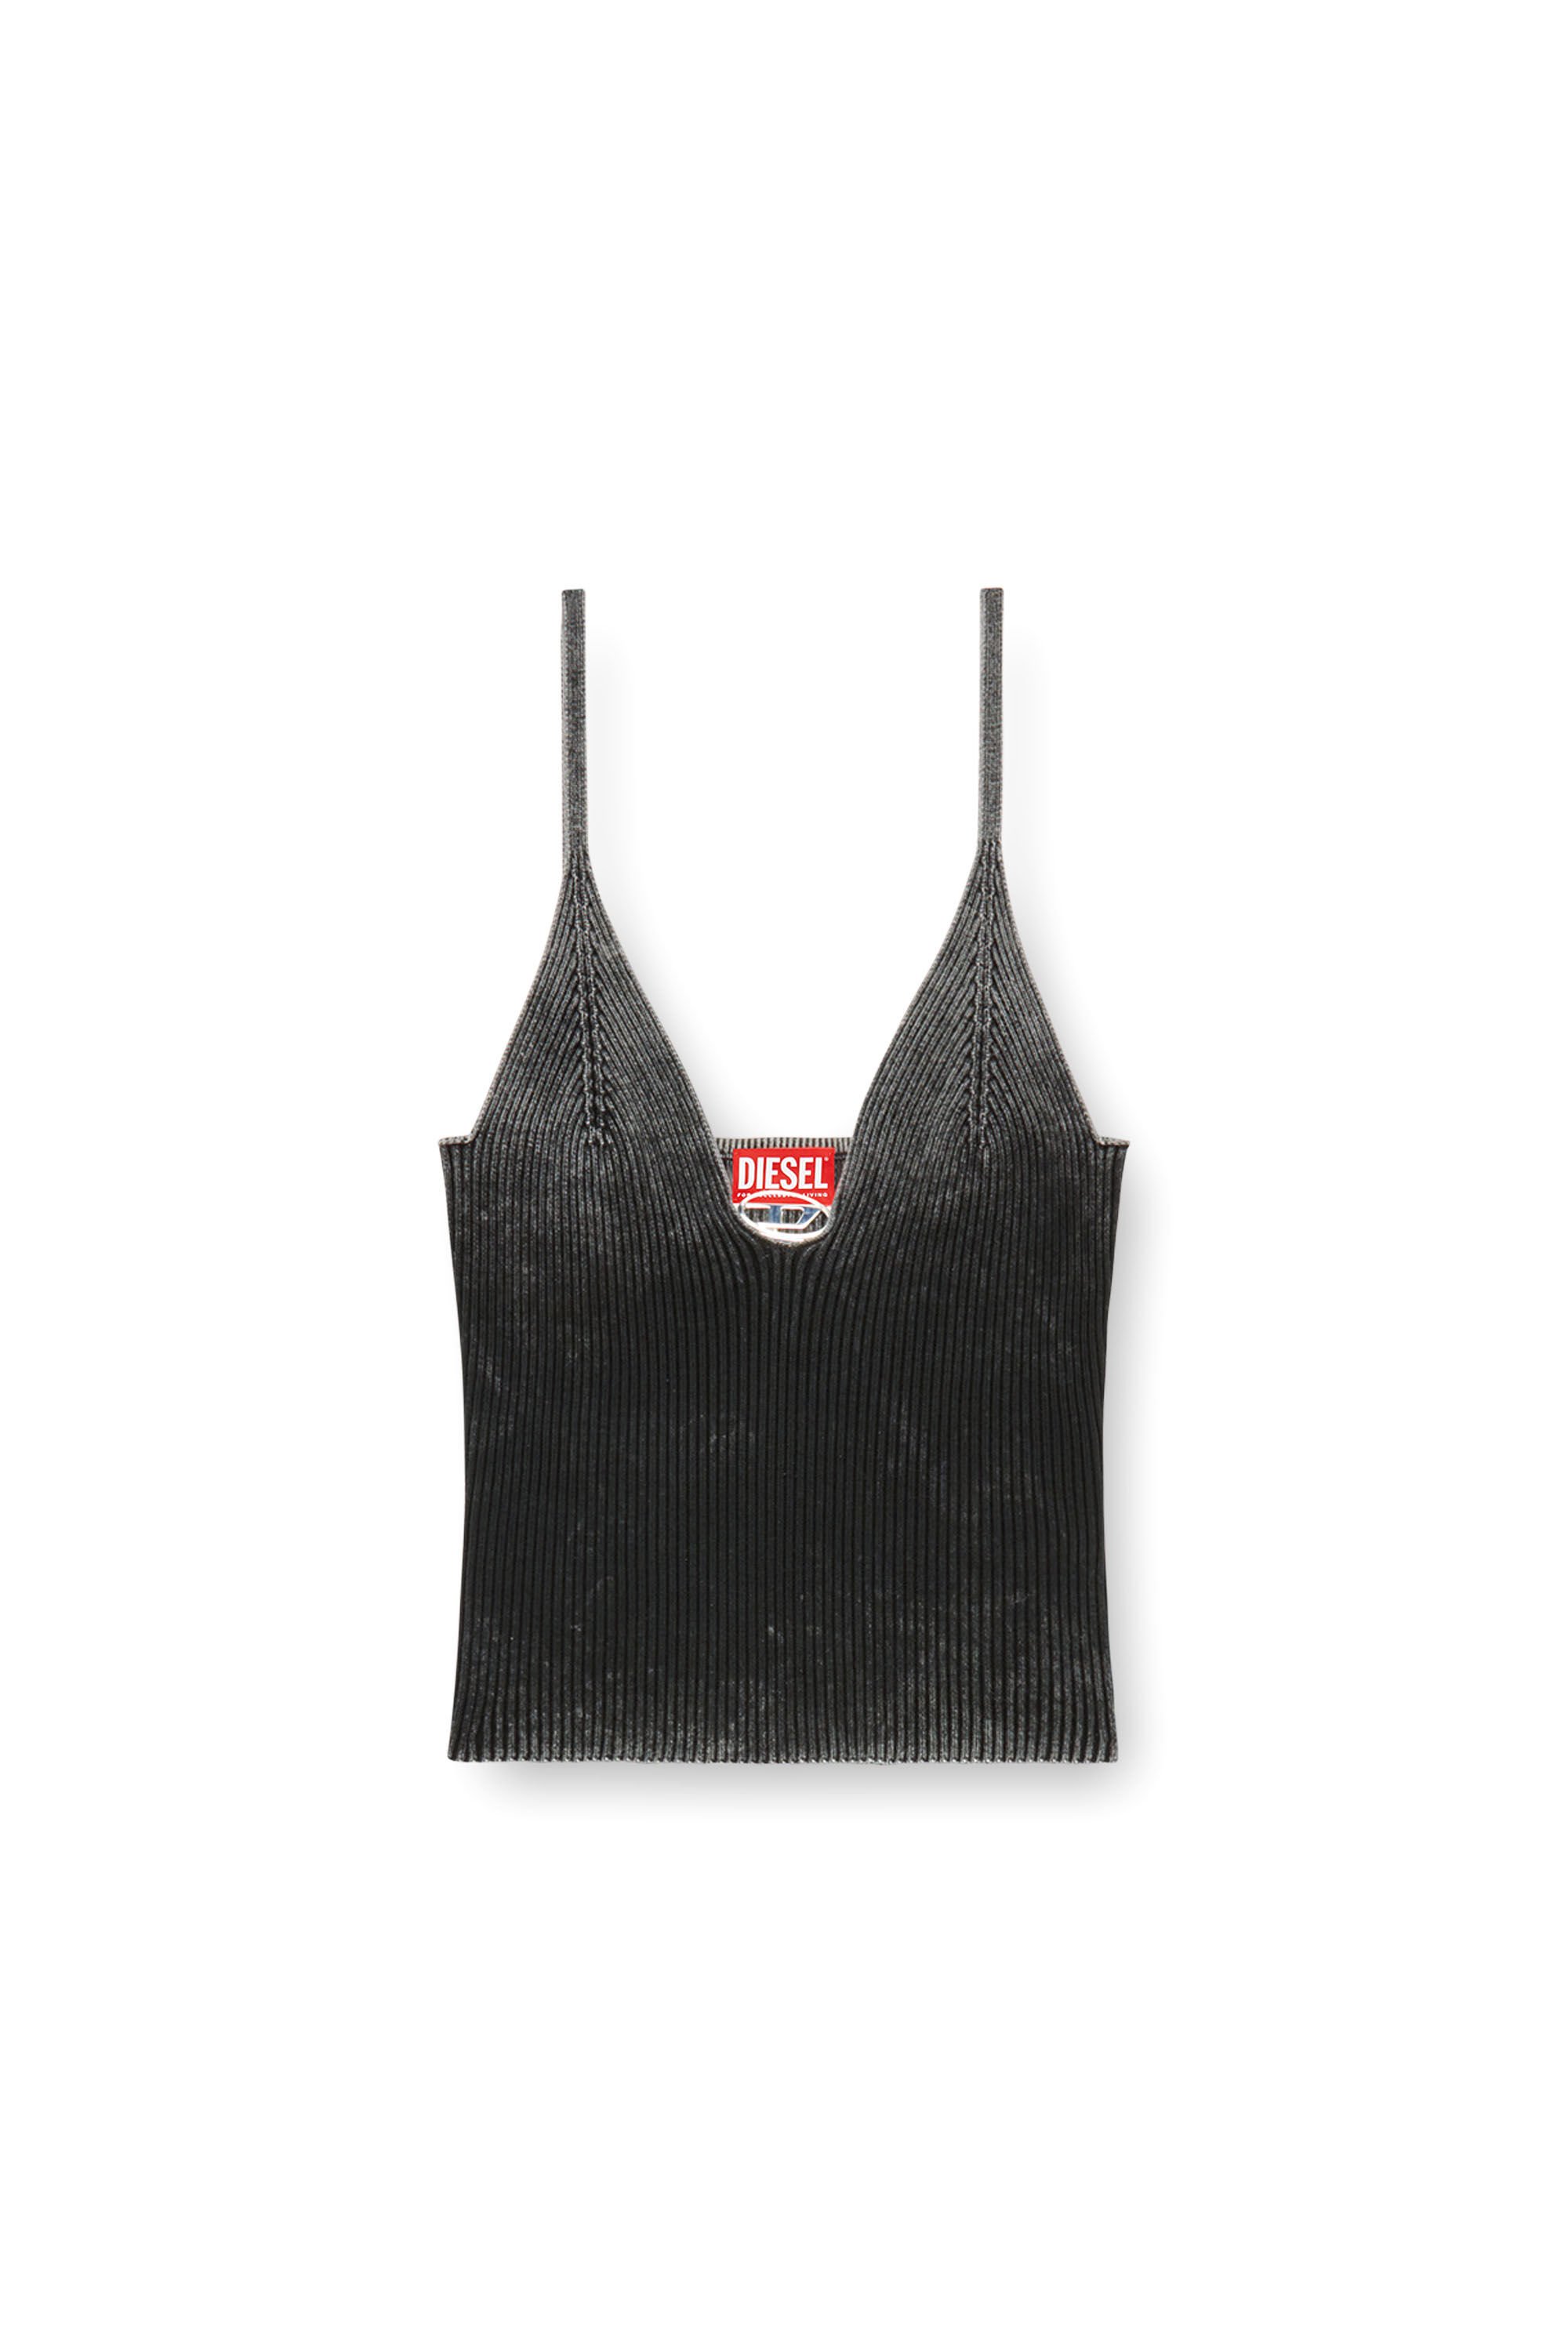 Diesel - M-LAILA, Woman Camisole in faded ribbed knit in Black - Image 2